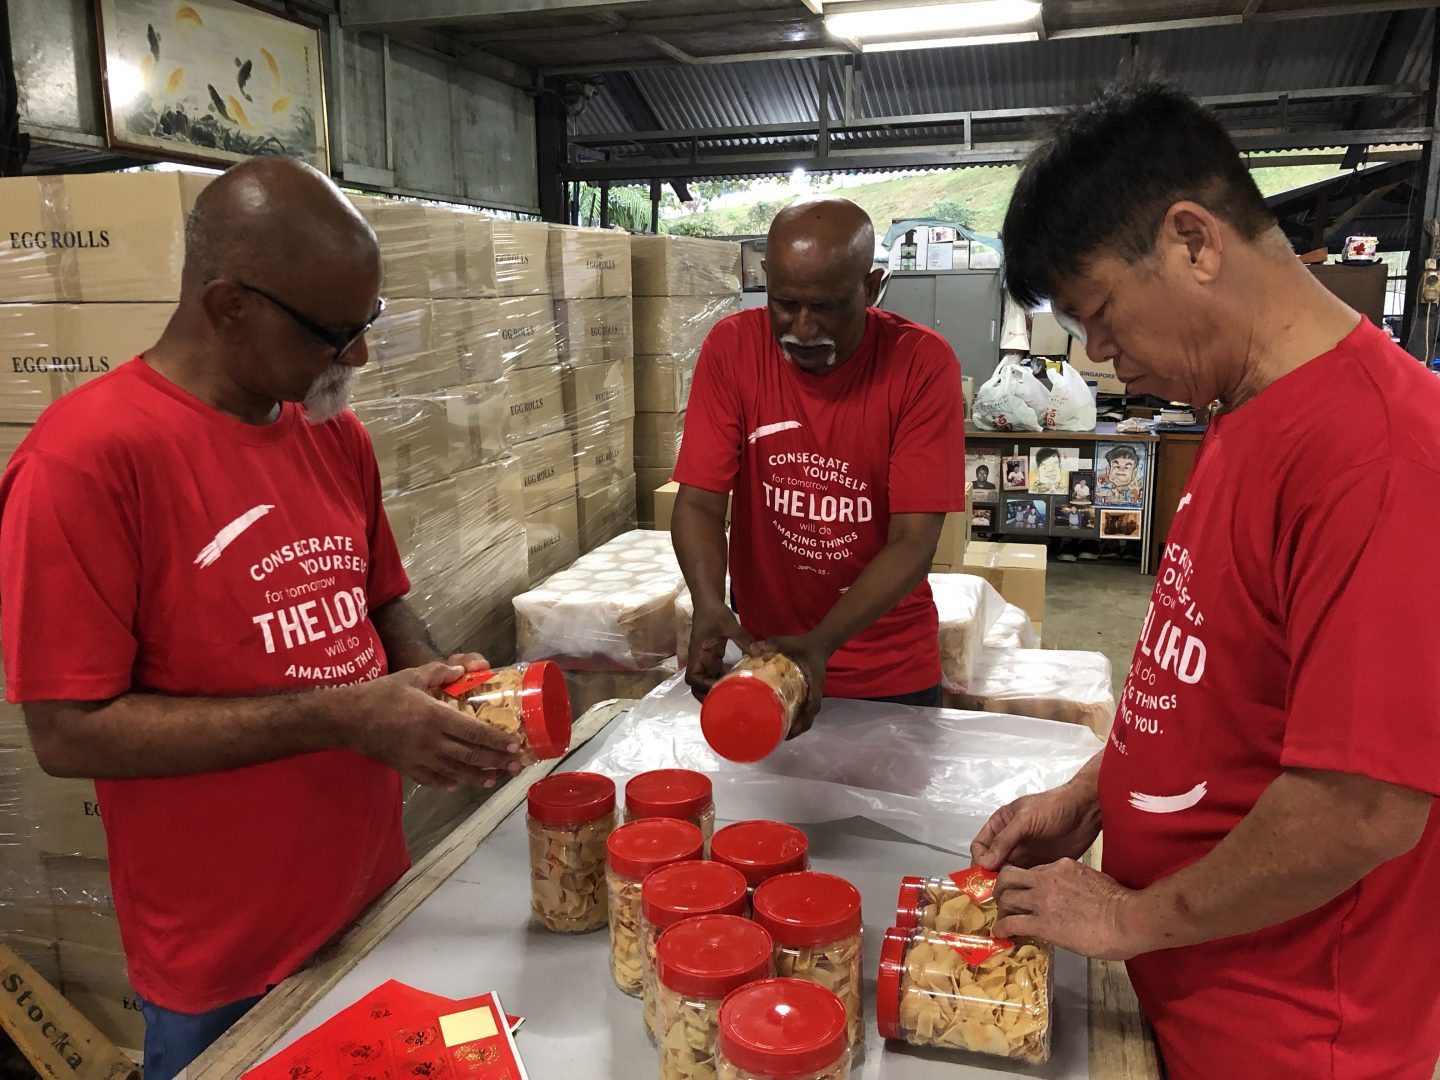 Sart (middle) packing the Chinese New Year goodies with the other THP residents. Photo by Geraldine Tan.